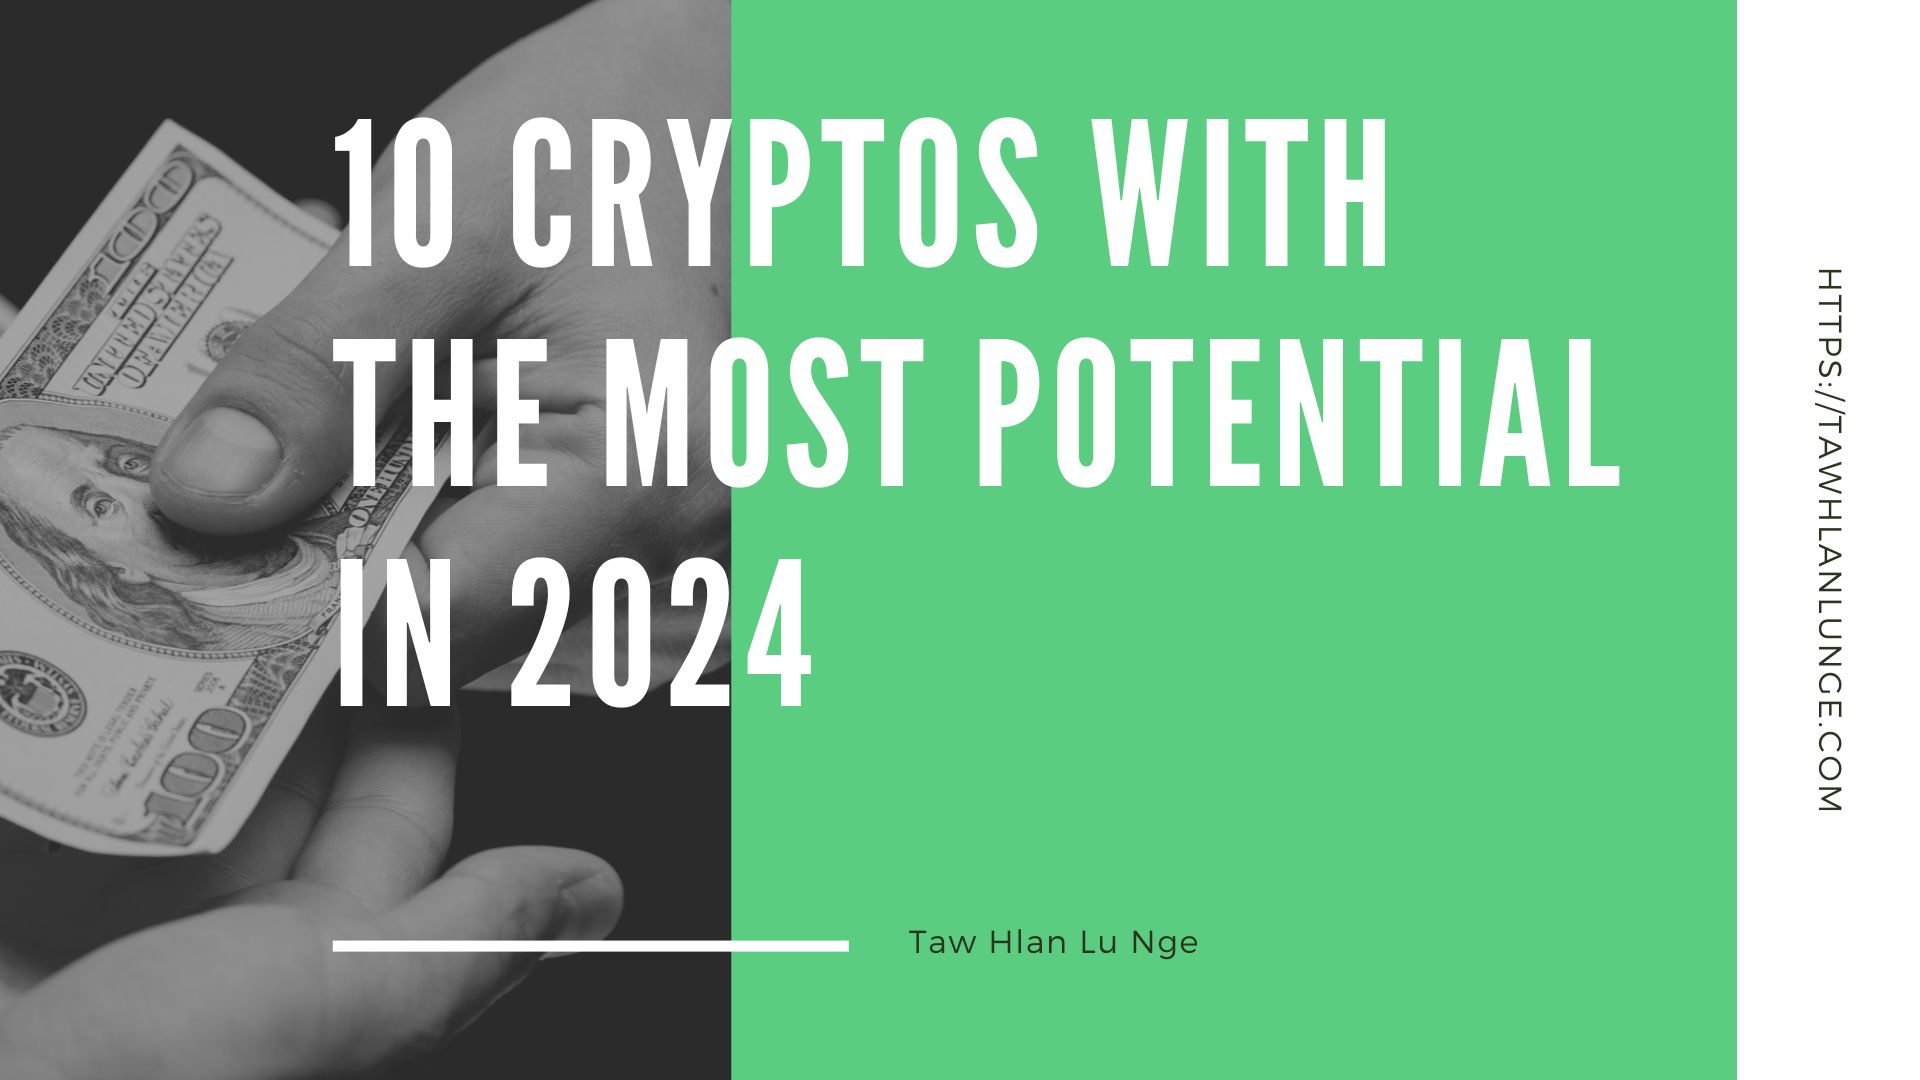 10 Cryptos With the Most Potential in 2024